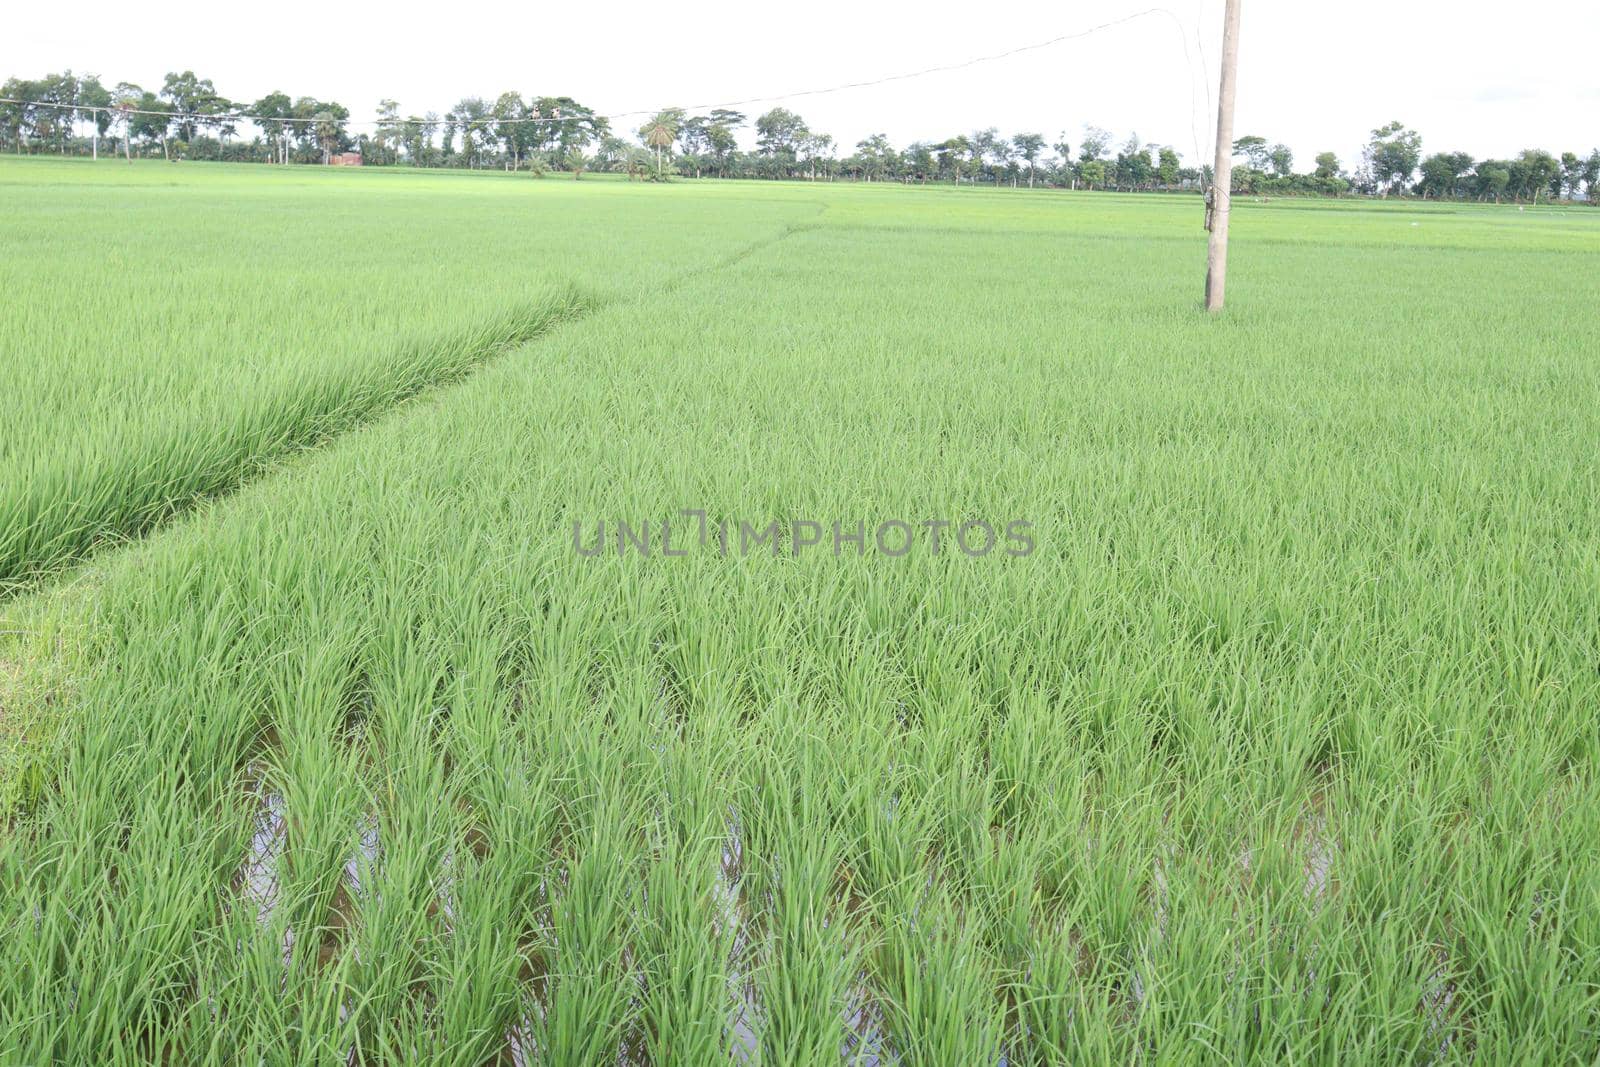 green colored paddy farm on field for harvest